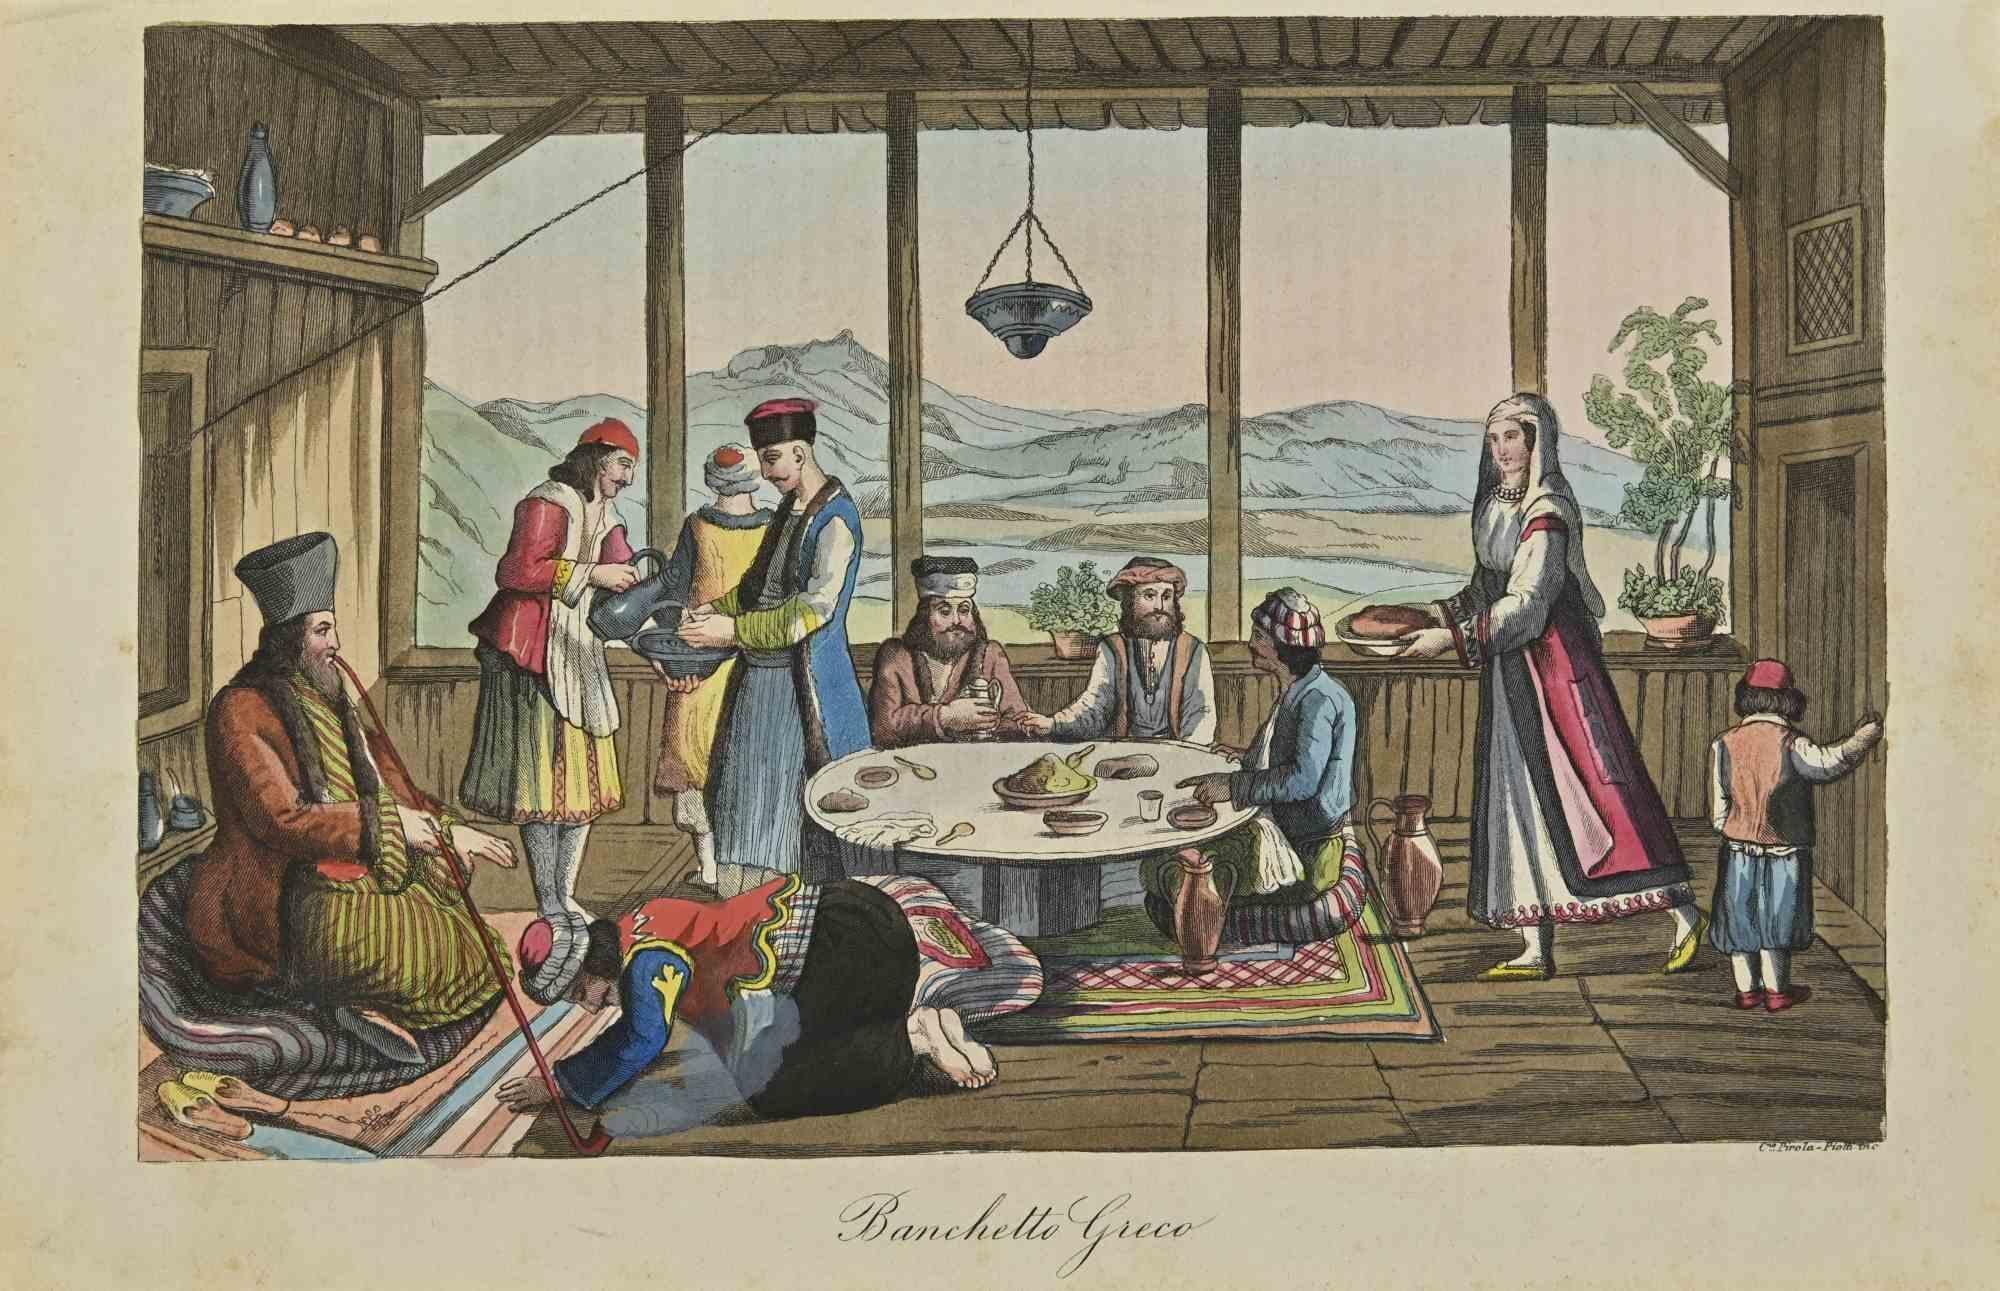 Various Artists Landscape Print - Uses and Customs - Greek banquet - Lithograph - 1862